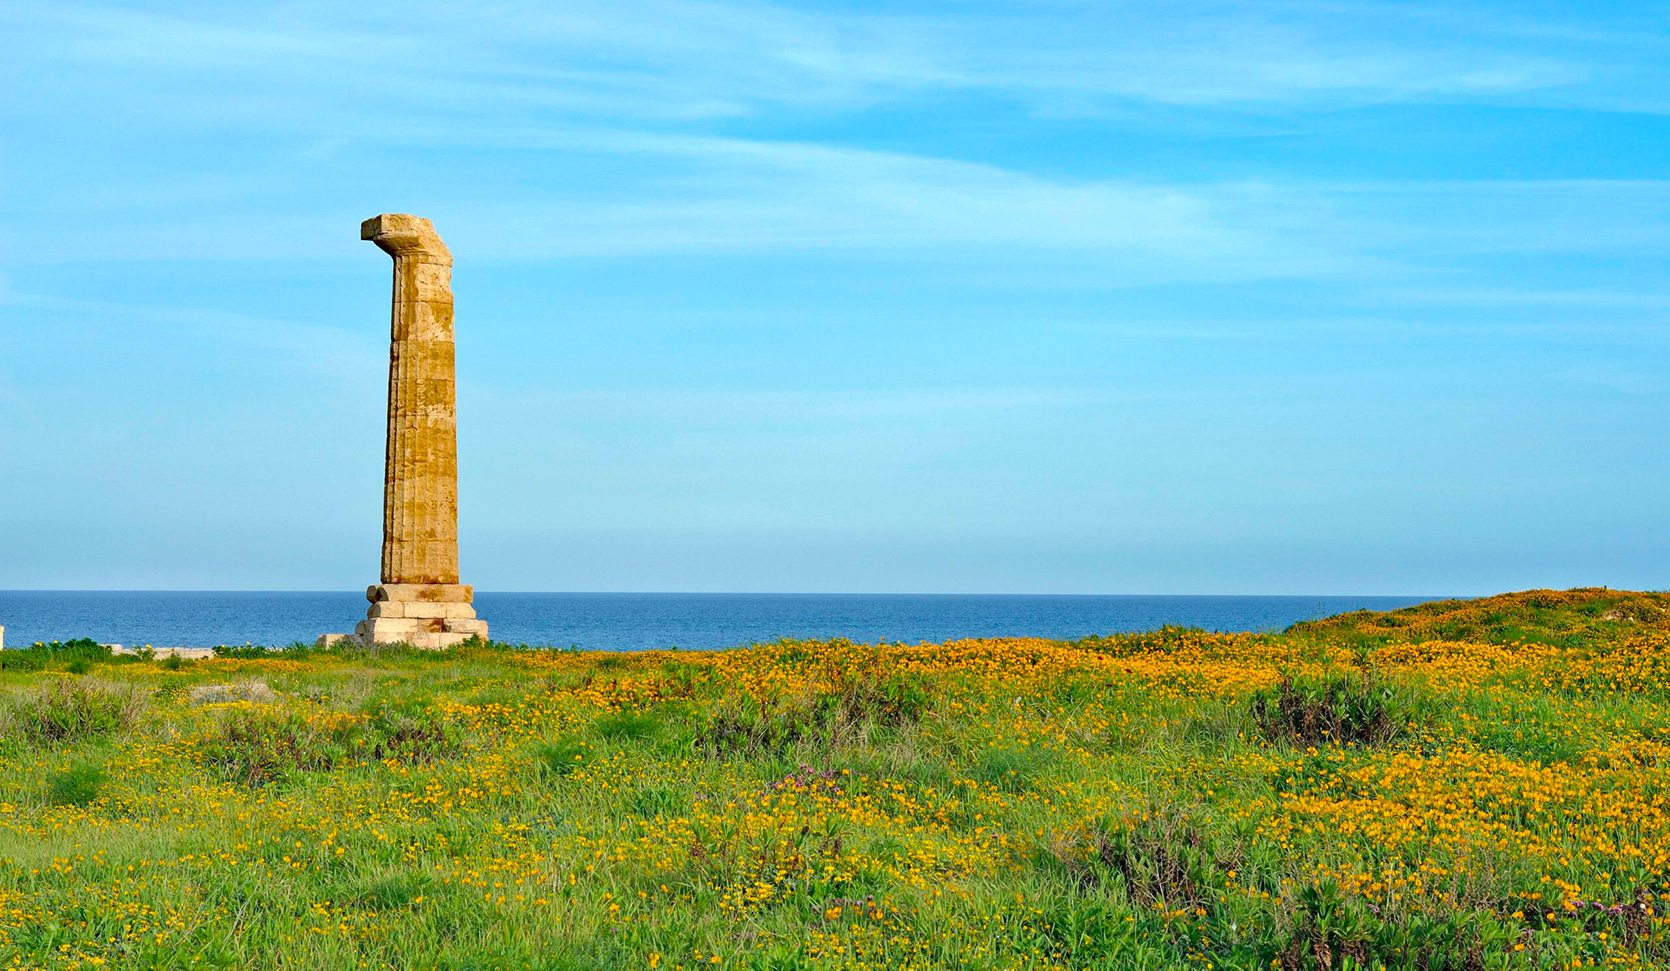 The column that 2500 years ago was part of the ancient temple of Hera Lacinia, in the archaeological area of Capo Colonna, near Crotone